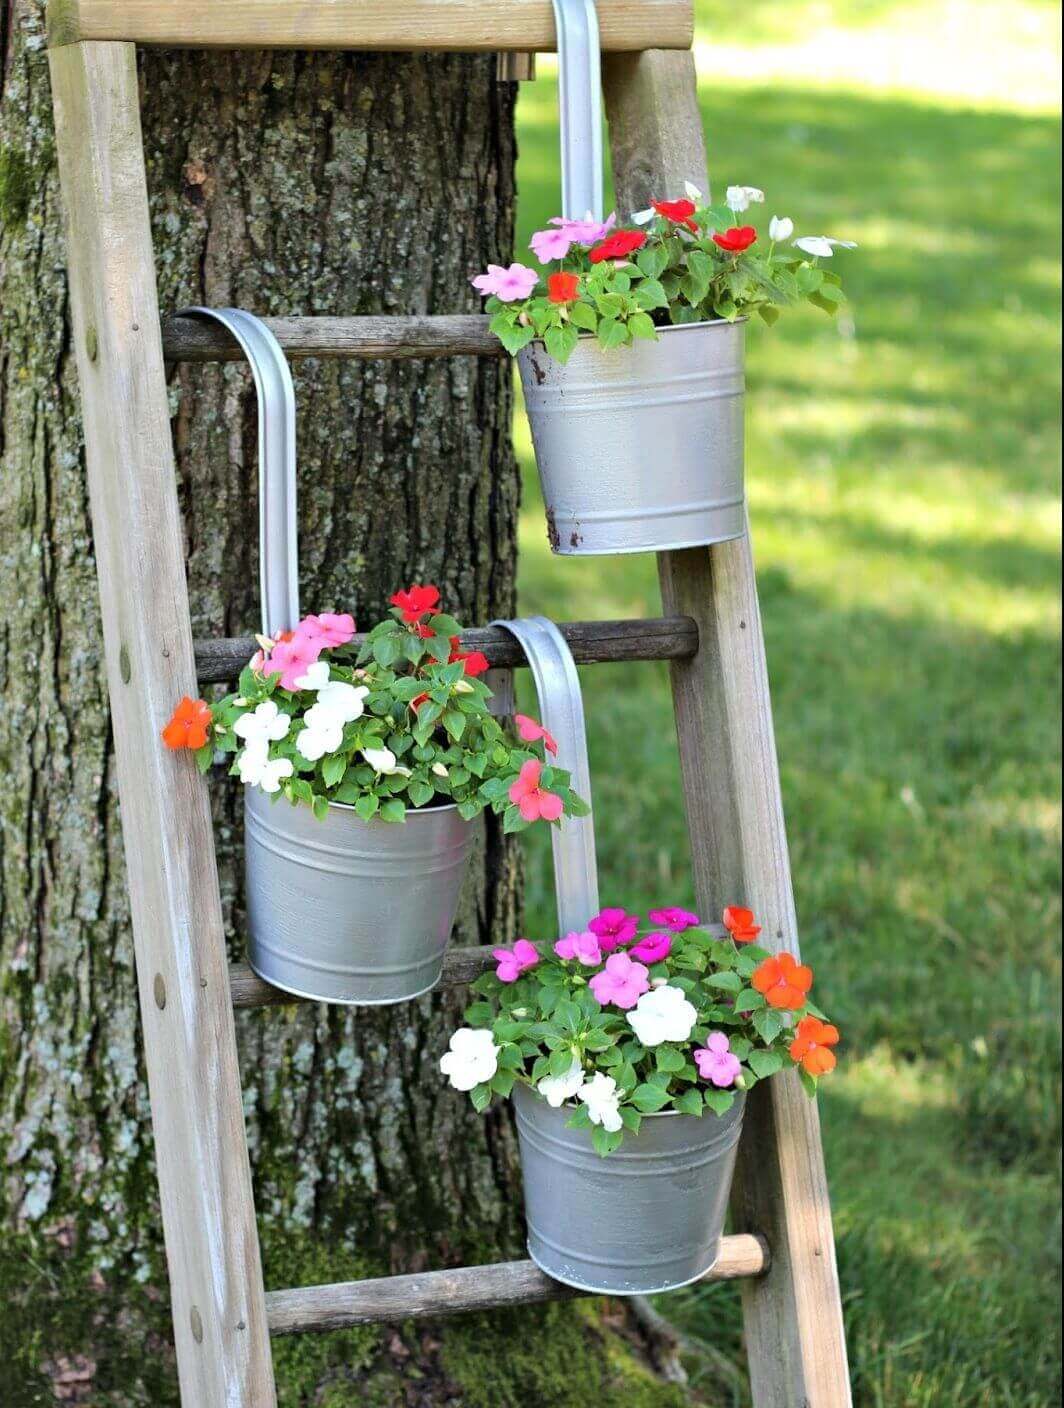 Gardening Ideas for Small Yards Use Upwards Spaces - Harptimes.com